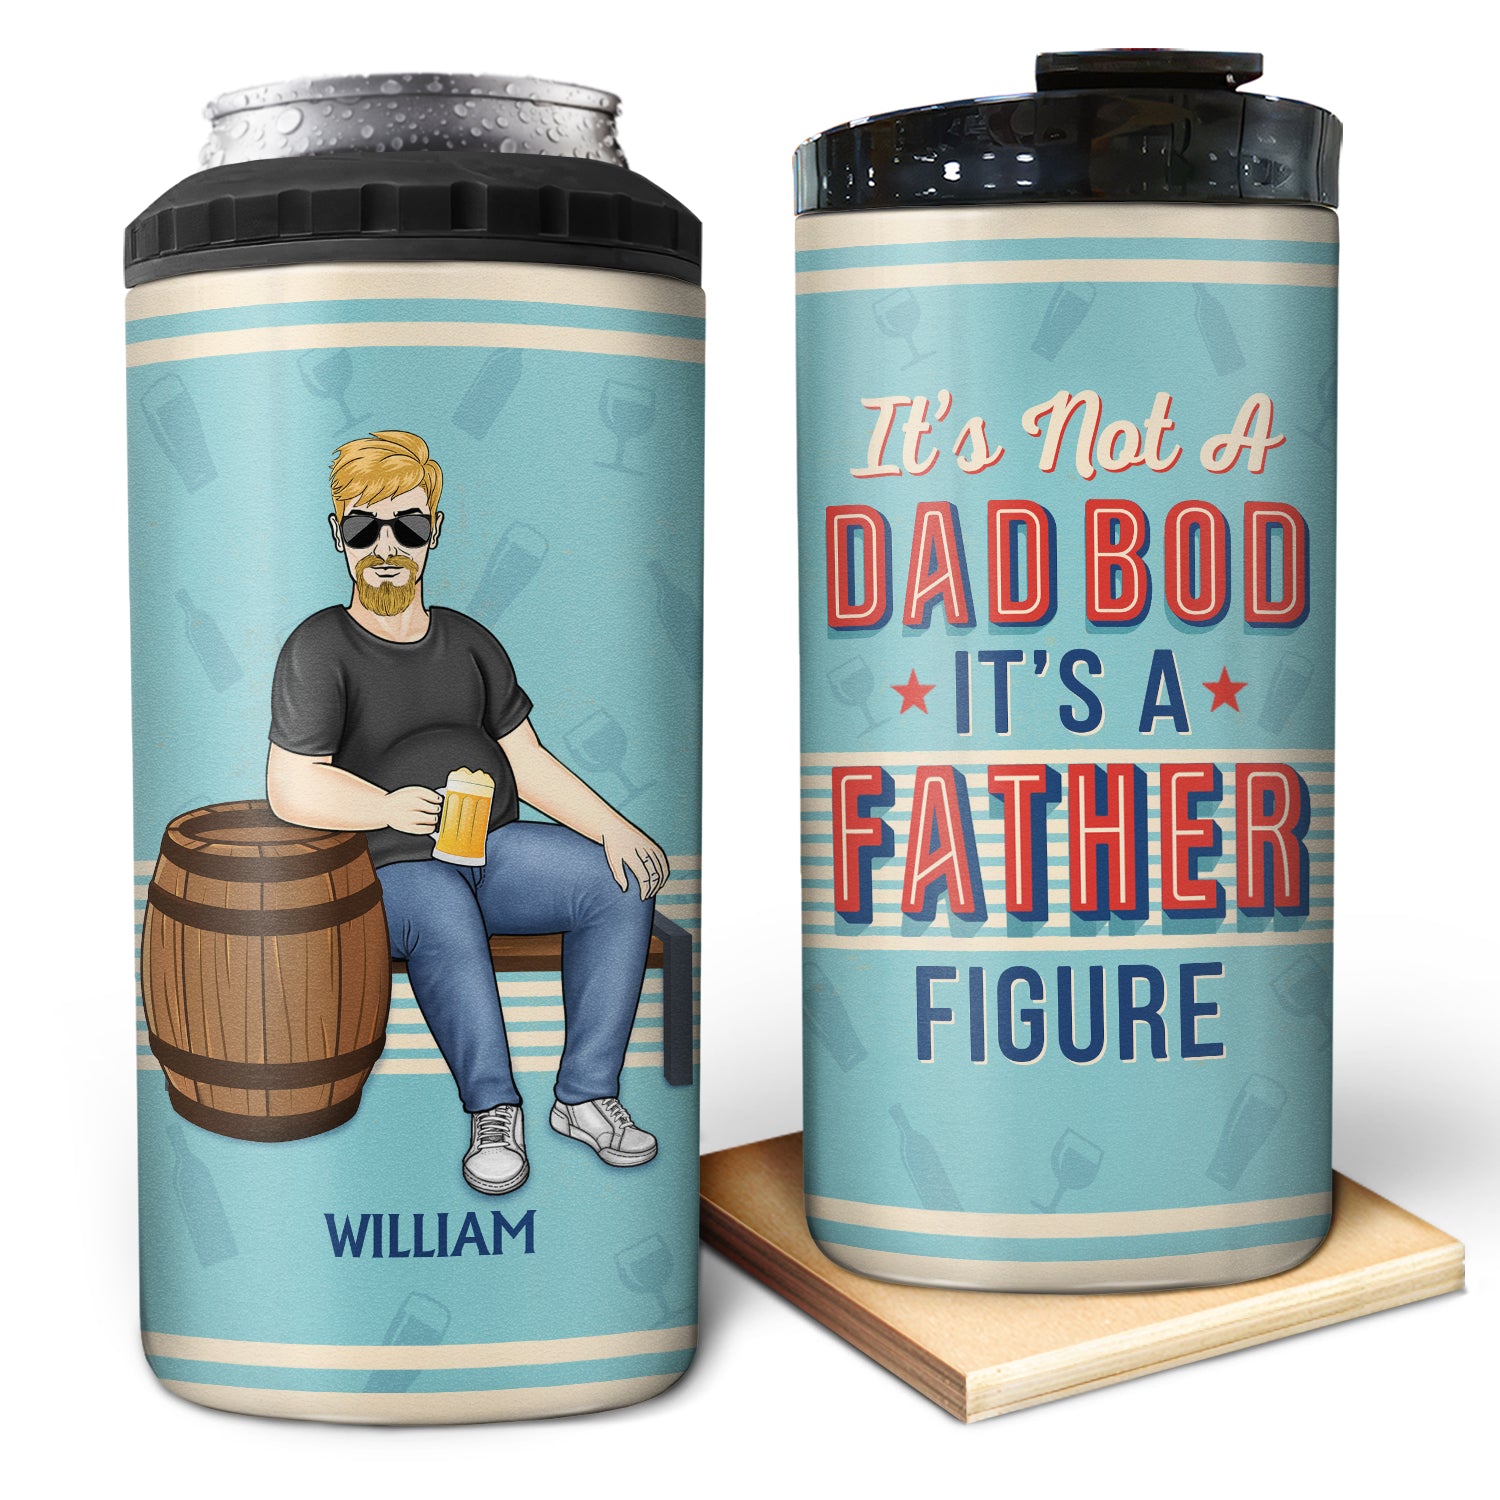 It's Not A Dad Bod It's Father Figure - Birthday Gift For Dad, Grandpa - Personalized Custom 4 In 1 Can Cooler Tumbler